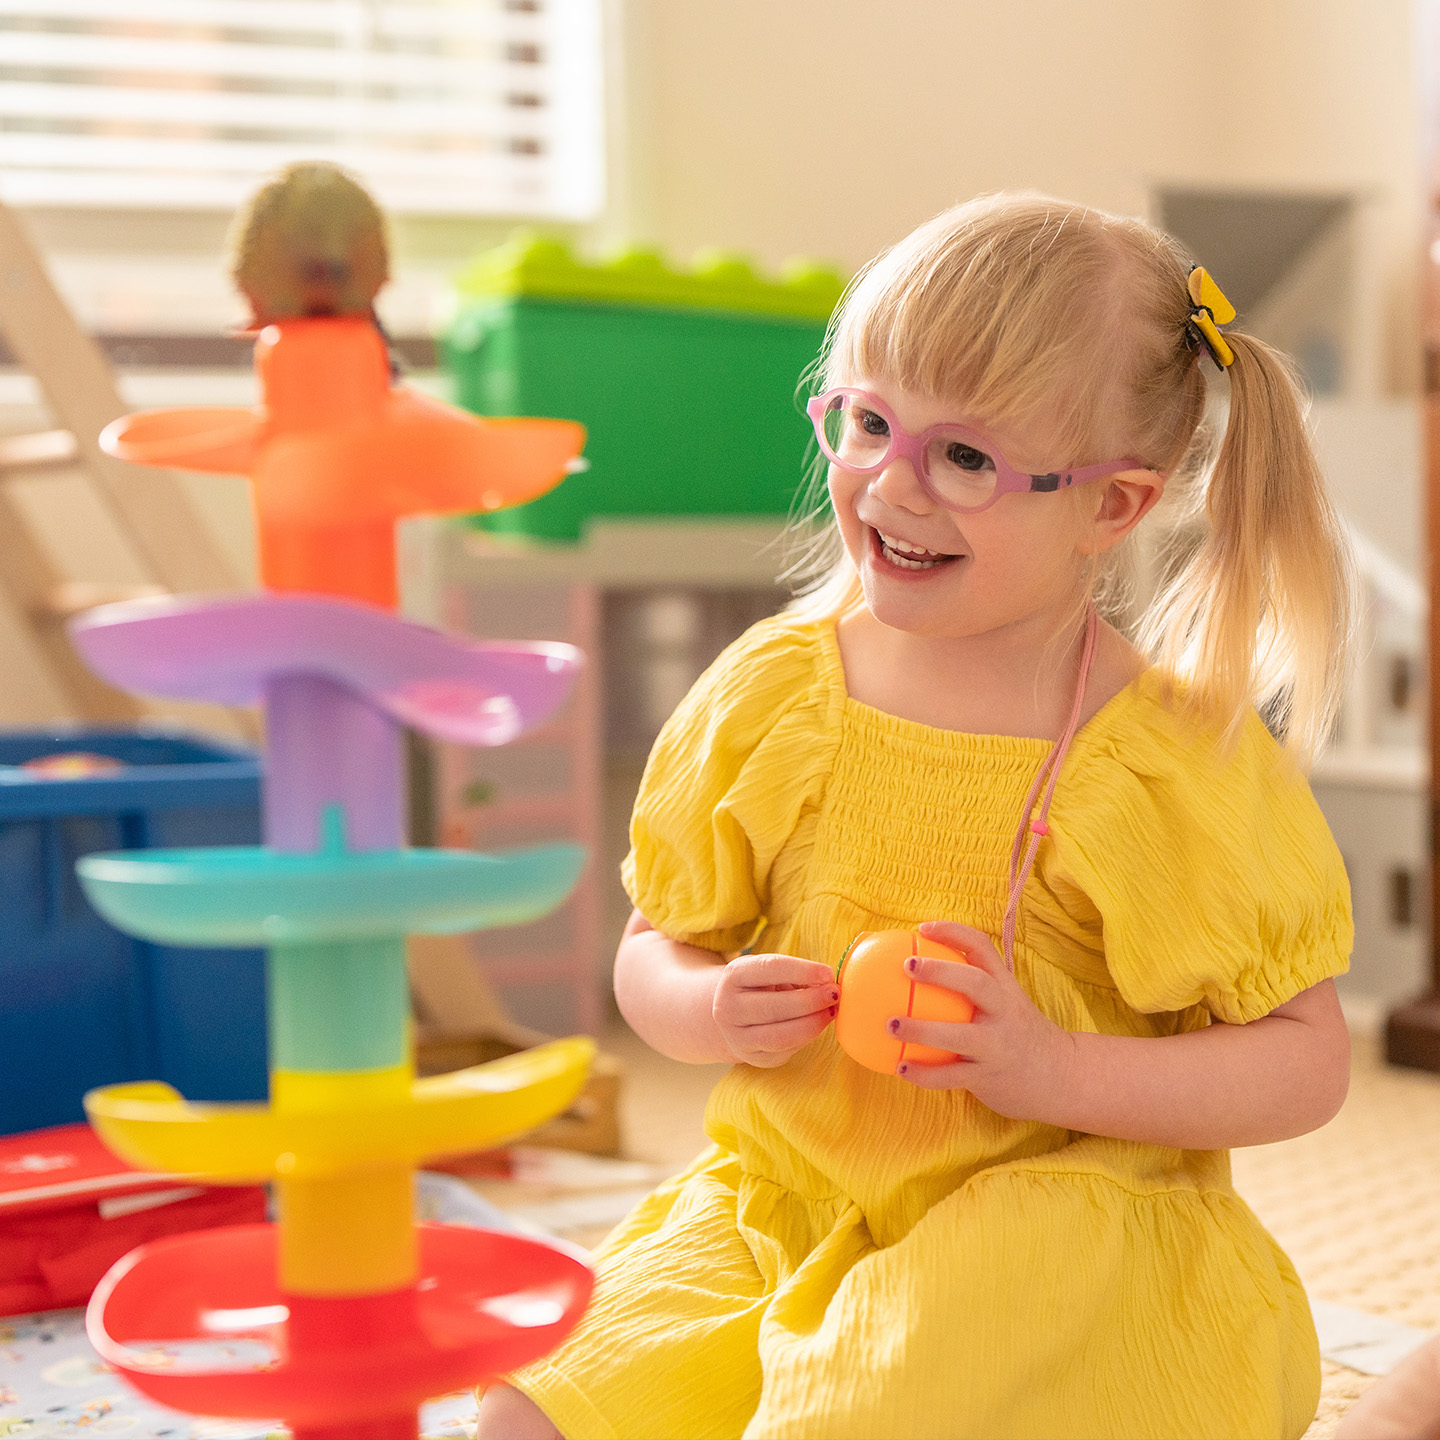 Toddler in a yellow dress plays with toys on the floor